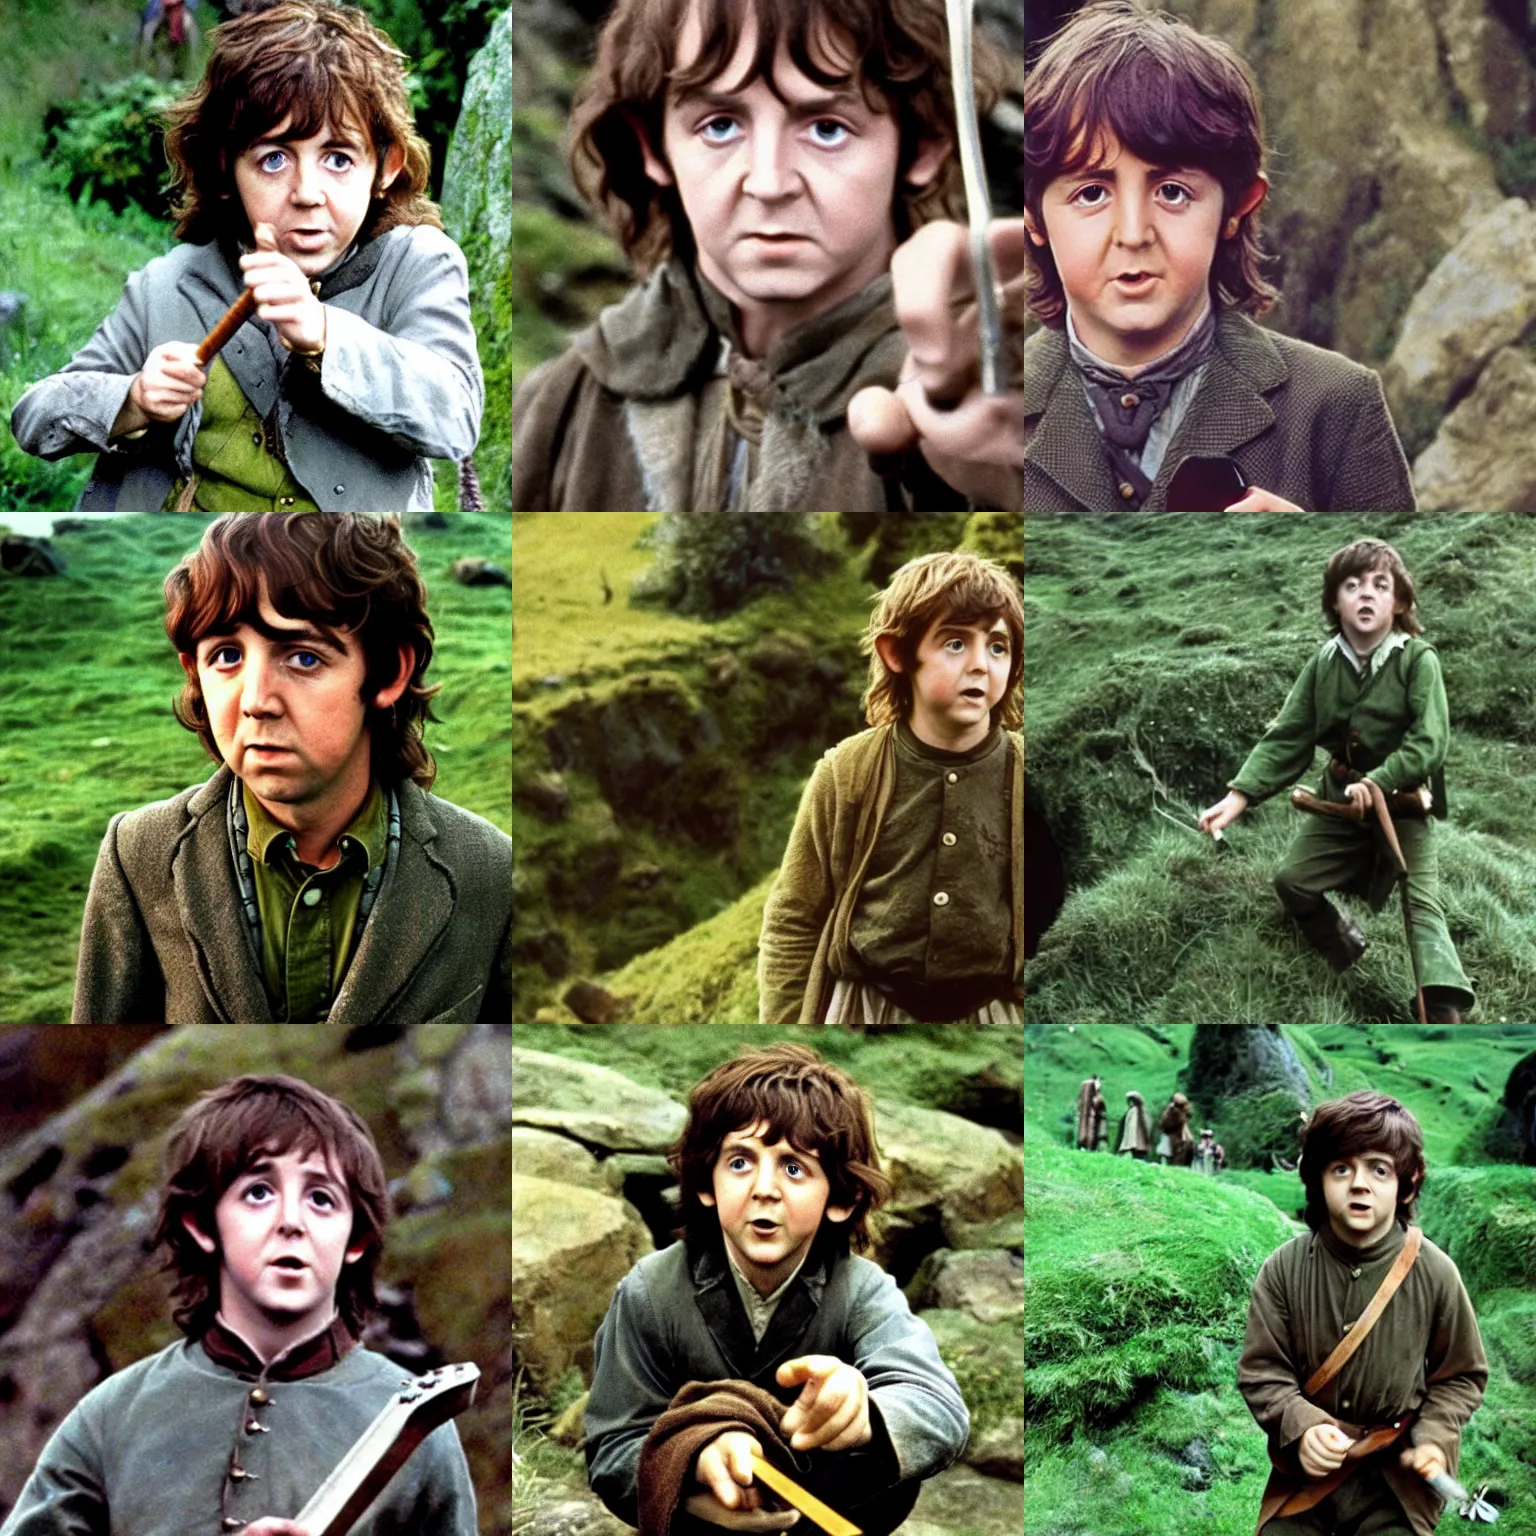 Prompt: A full color still of young Paul McCartney as a hobbit in The Lord of the Rings, directed by Stanley Kubrick, 1967